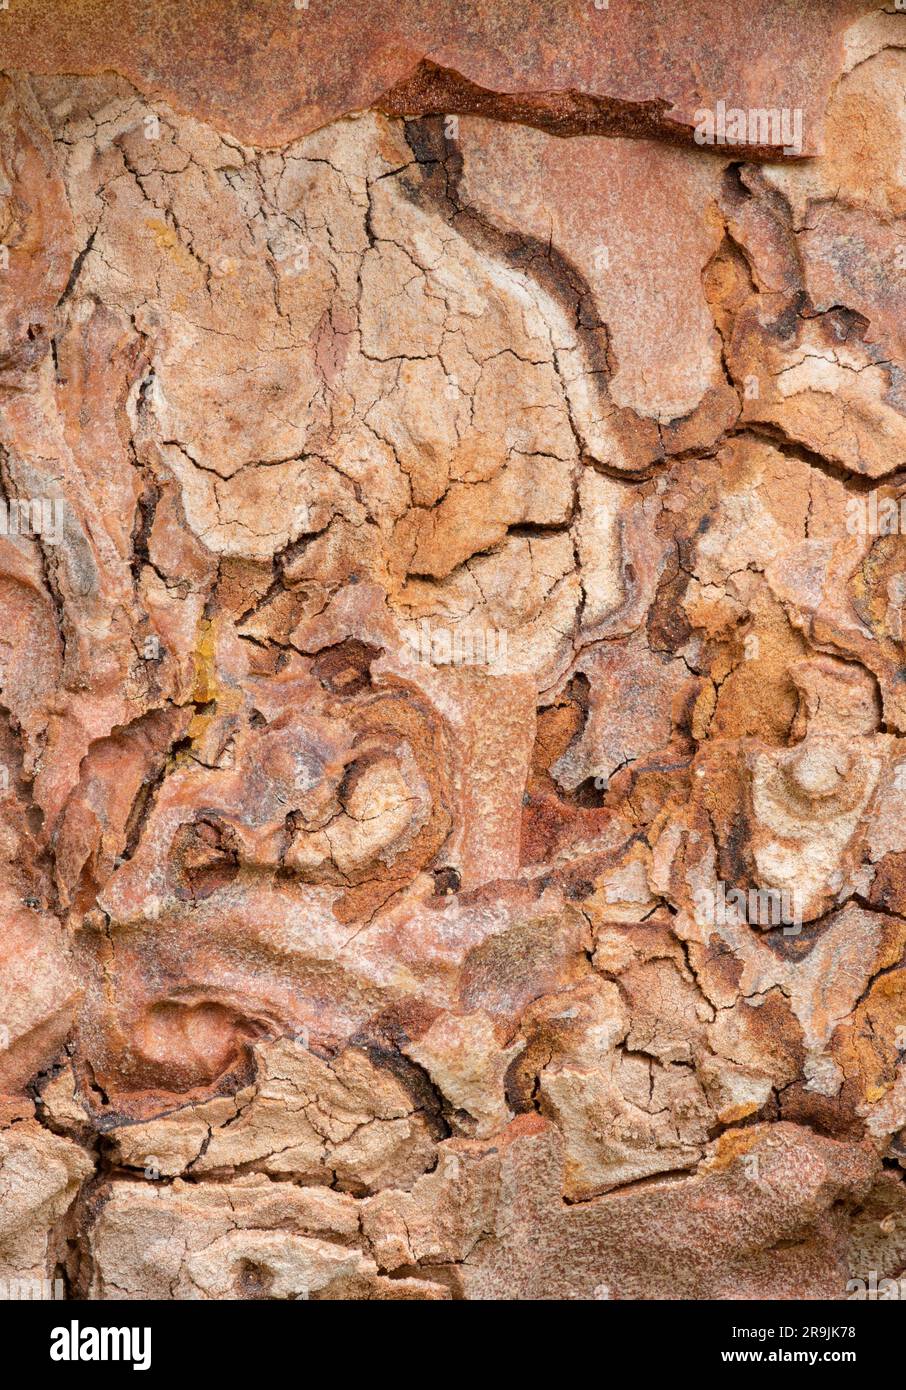 Macro photograph of the textures in the bark of a Turkish pine know as Pinus brutia Stock Photo